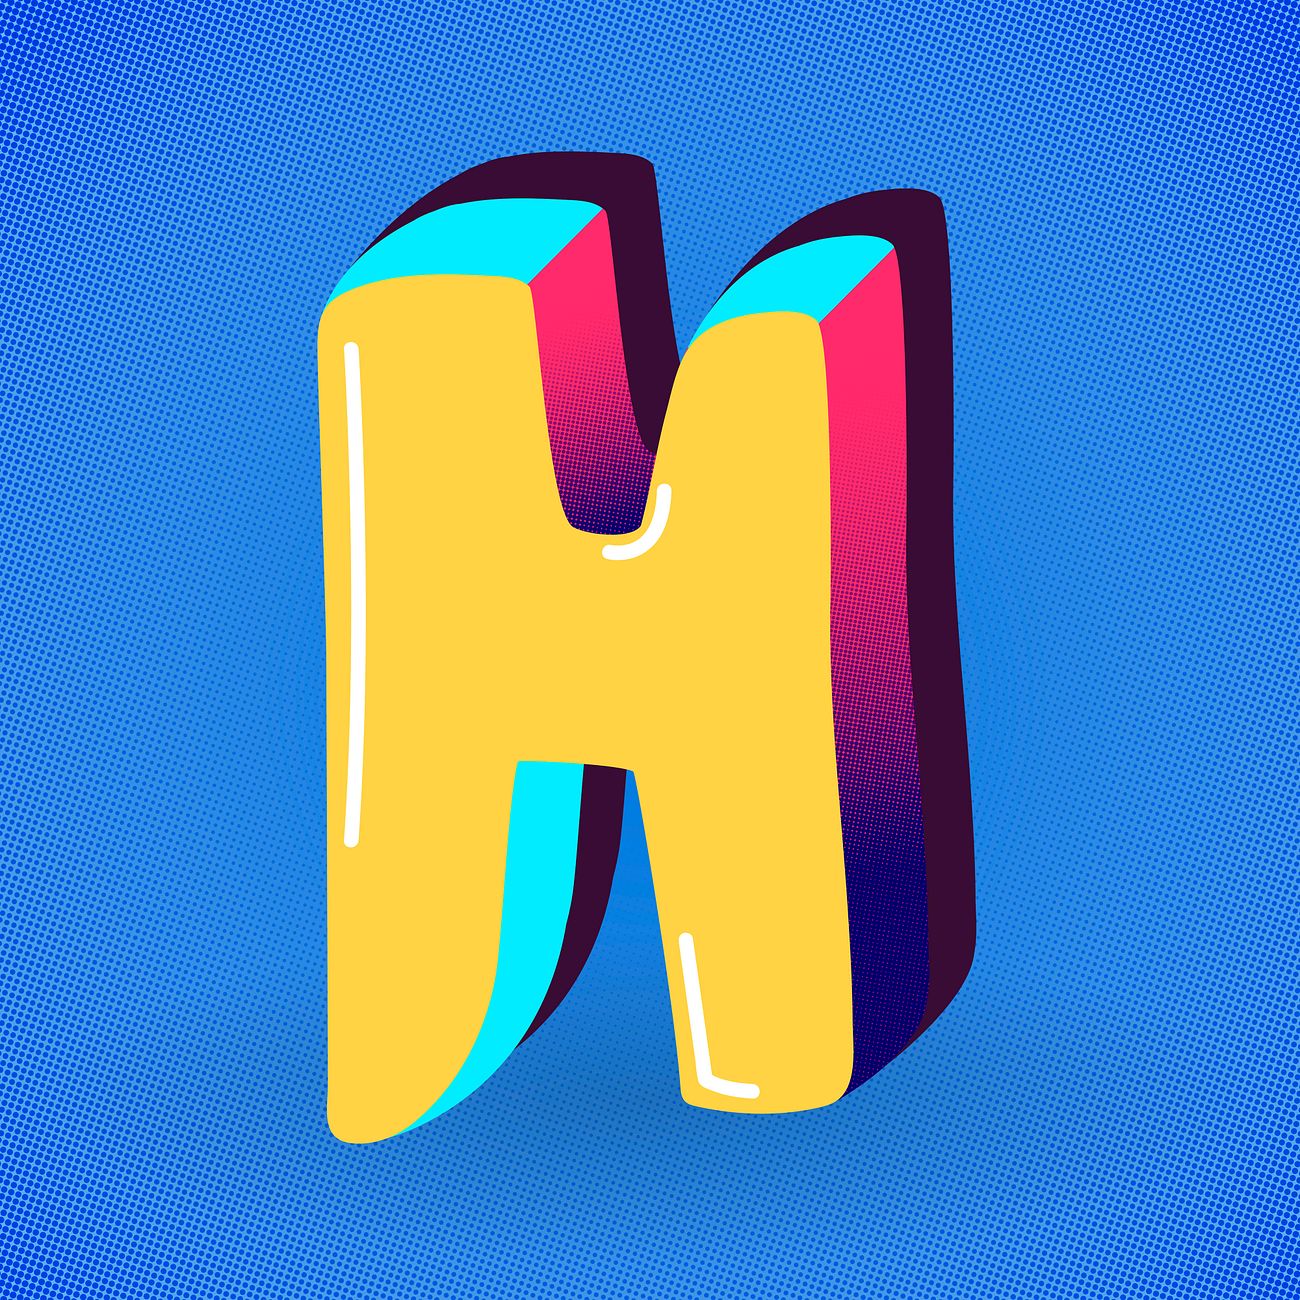 H Yellow Letter Images | Free Vectors, PNGs, Mockups & Backgrounds ...